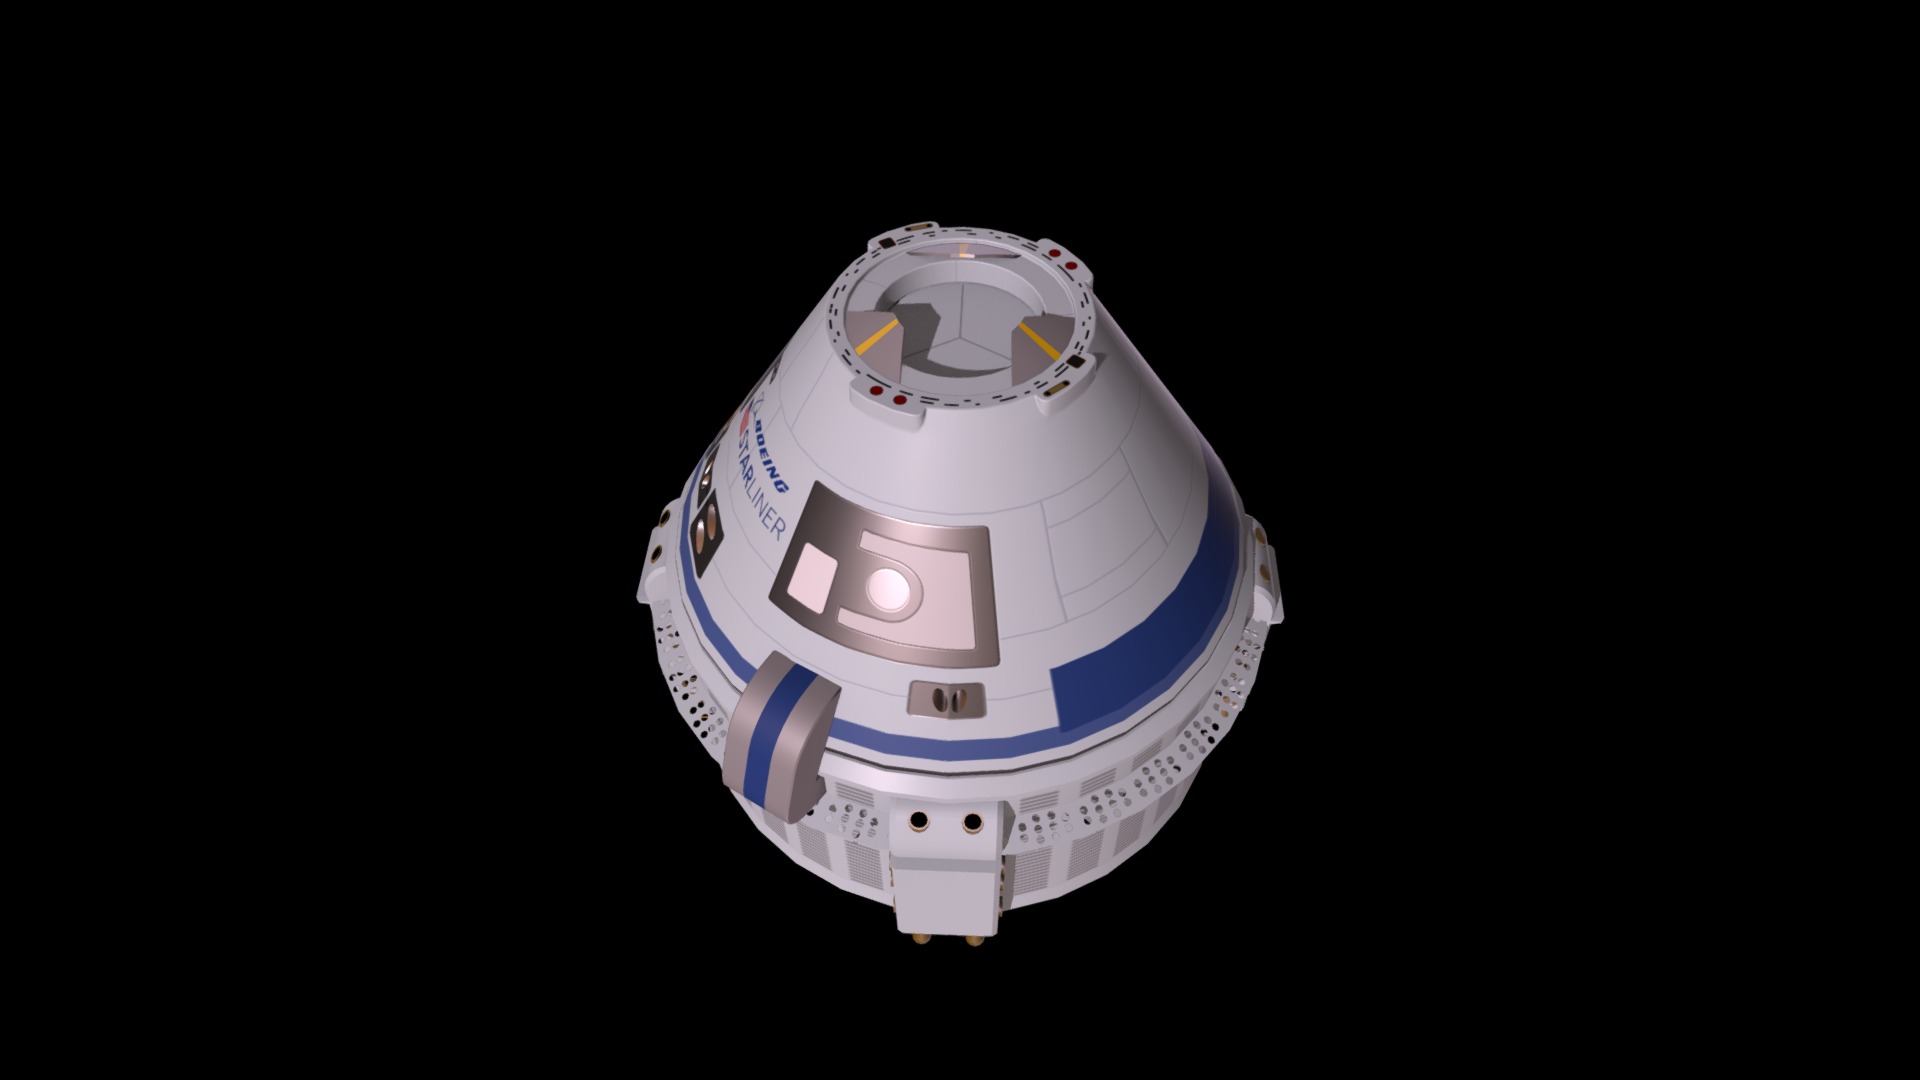 3D model CST-100 Starliner - This is a 3D model of the CST-100 Starliner. The 3D model is about a white and blue robot.